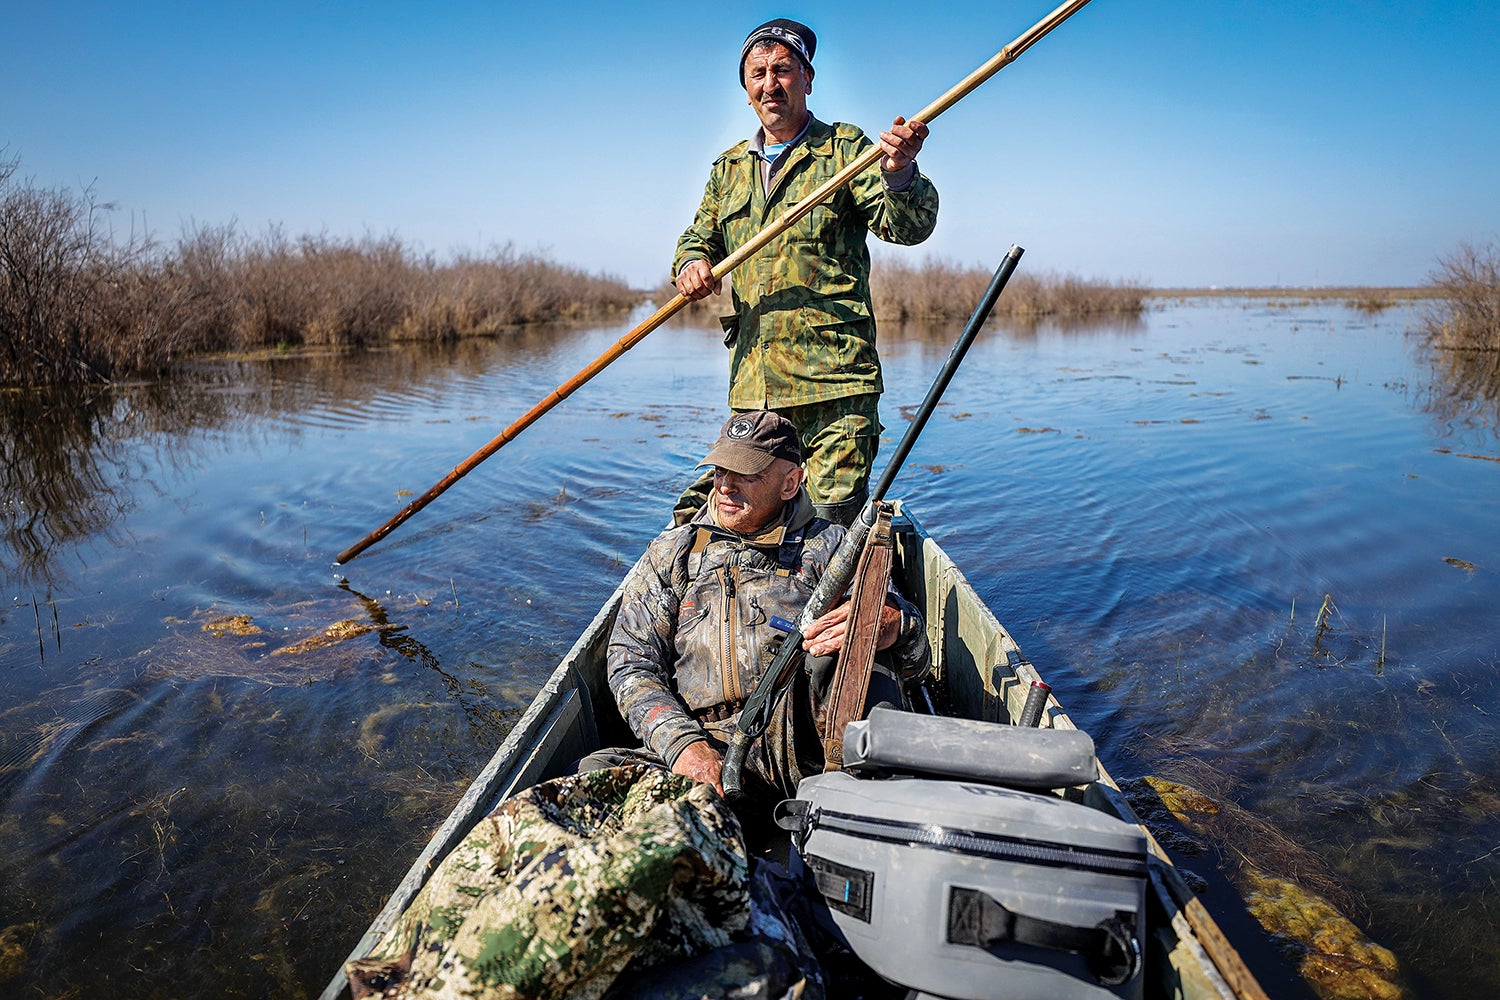 duck hunter sits in boat being push-poled by azerbaijani man through swampy area